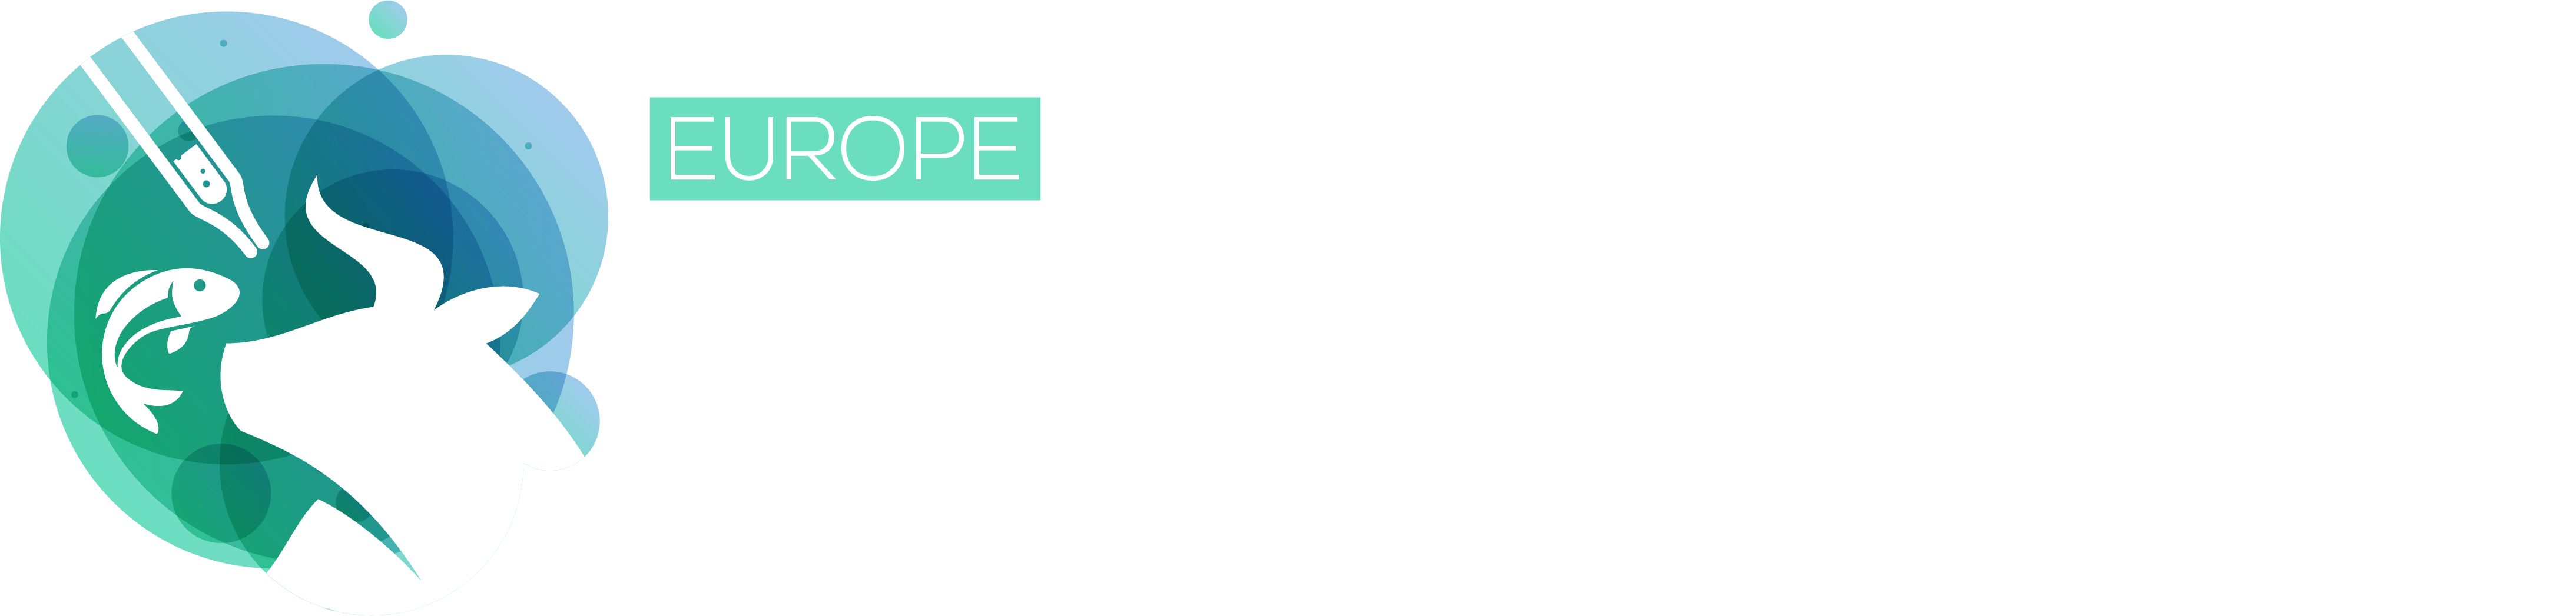 Cultivated Meat &amp; Seafood Summit Bioprocessing Europe Logo W